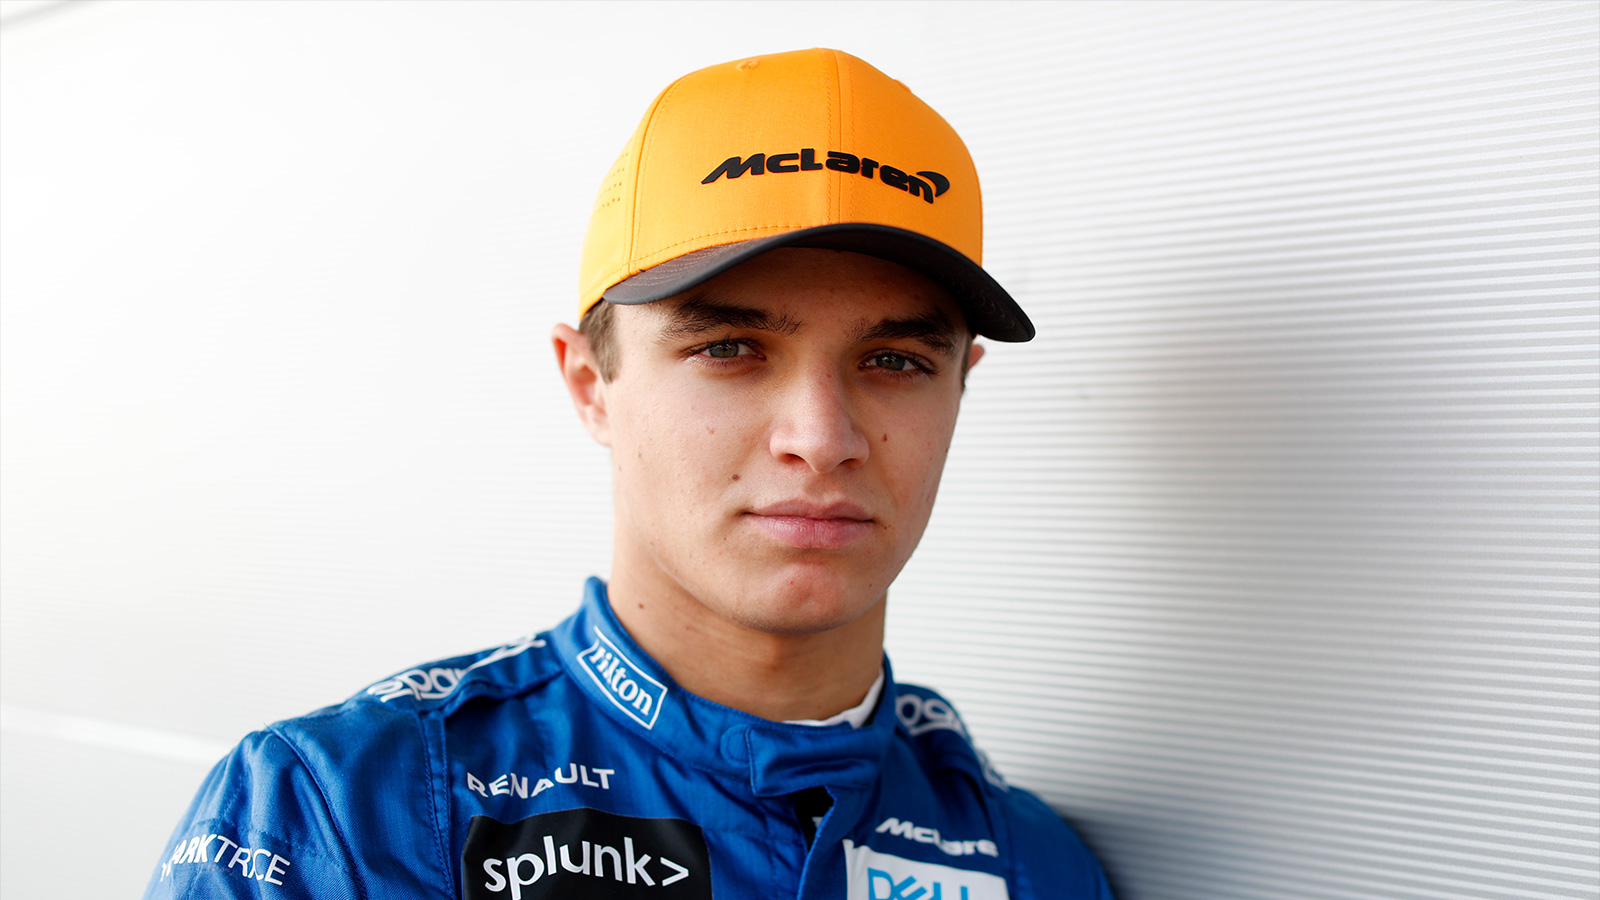 F1 driver Lando Norris will race in the Eseries Wednesday night.